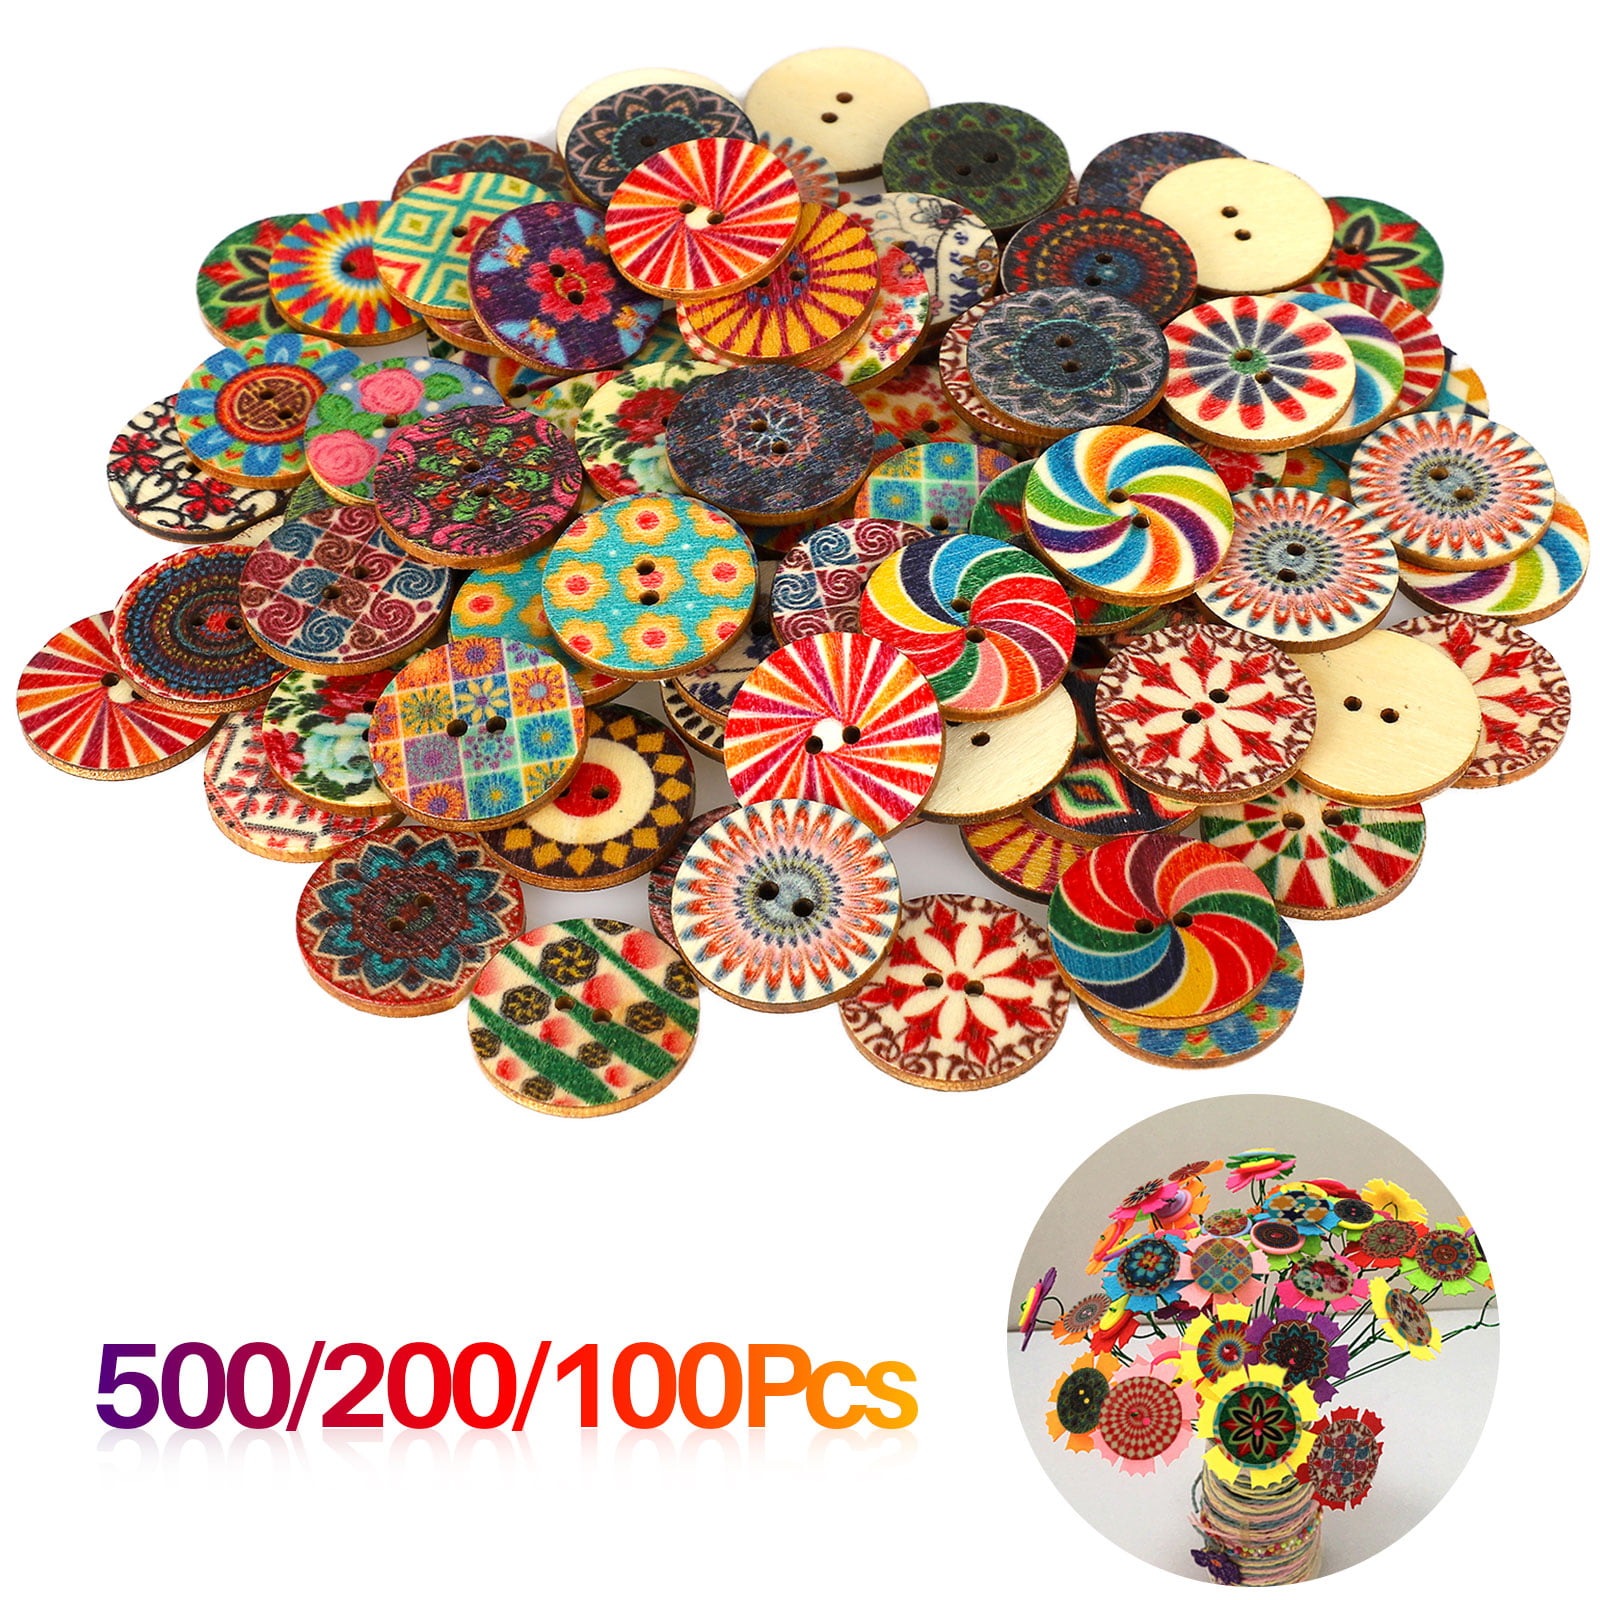 100Pcs Mixed Color Flower Print Wooden Buttons for Sewing Fasteners Scrap Booking and DIY with Love Buttons for Crafting Sewing Decoration